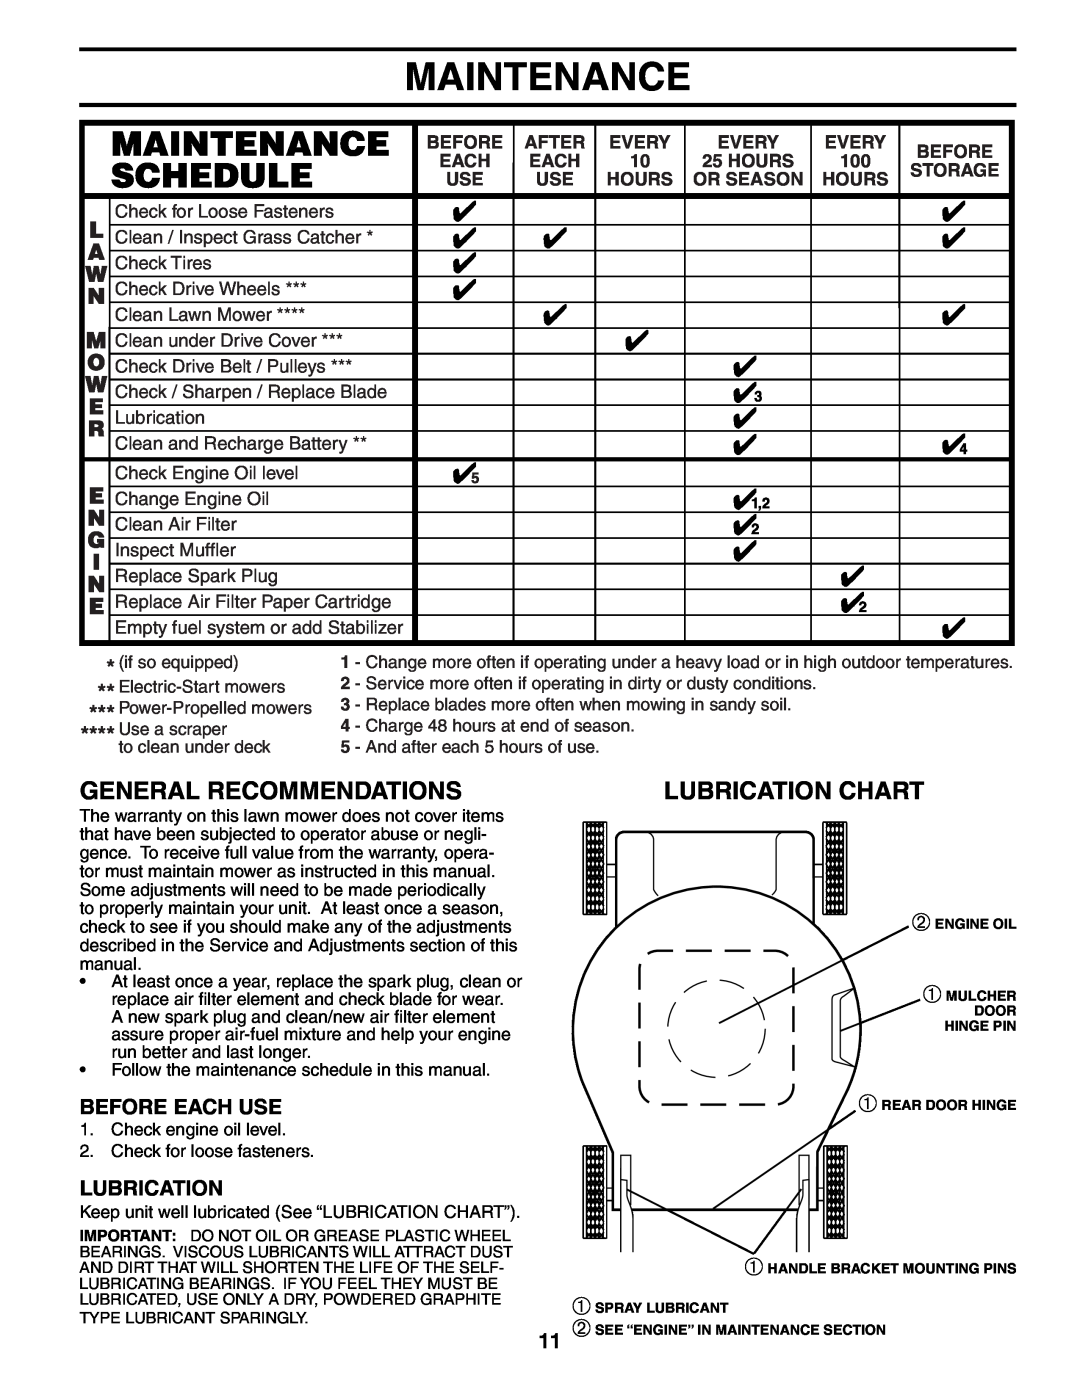 Husqvarna 67521 HV Maintenance, General Recommendations, Lubrication Chart, Before Each Use, After, Every, Hours, Storage 